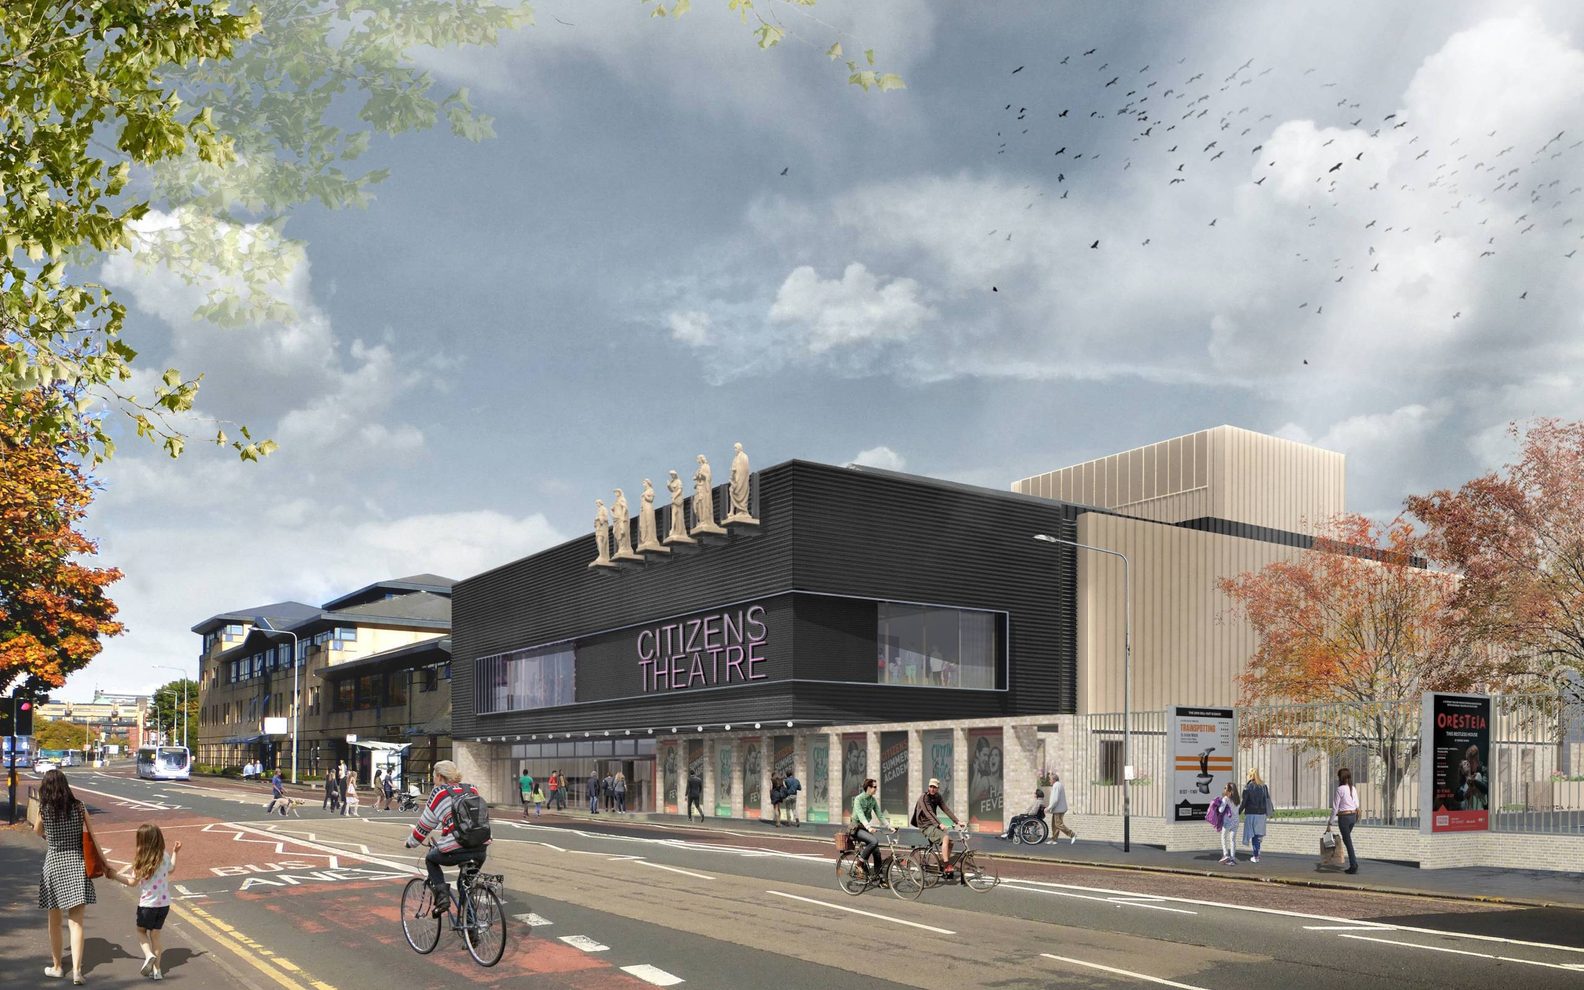 Architect's rendering of the new redeveloped exterior of the Citizens Theatre. The building features a new facade with black cladding, neon pink lettering, and a row of statues on the roof.